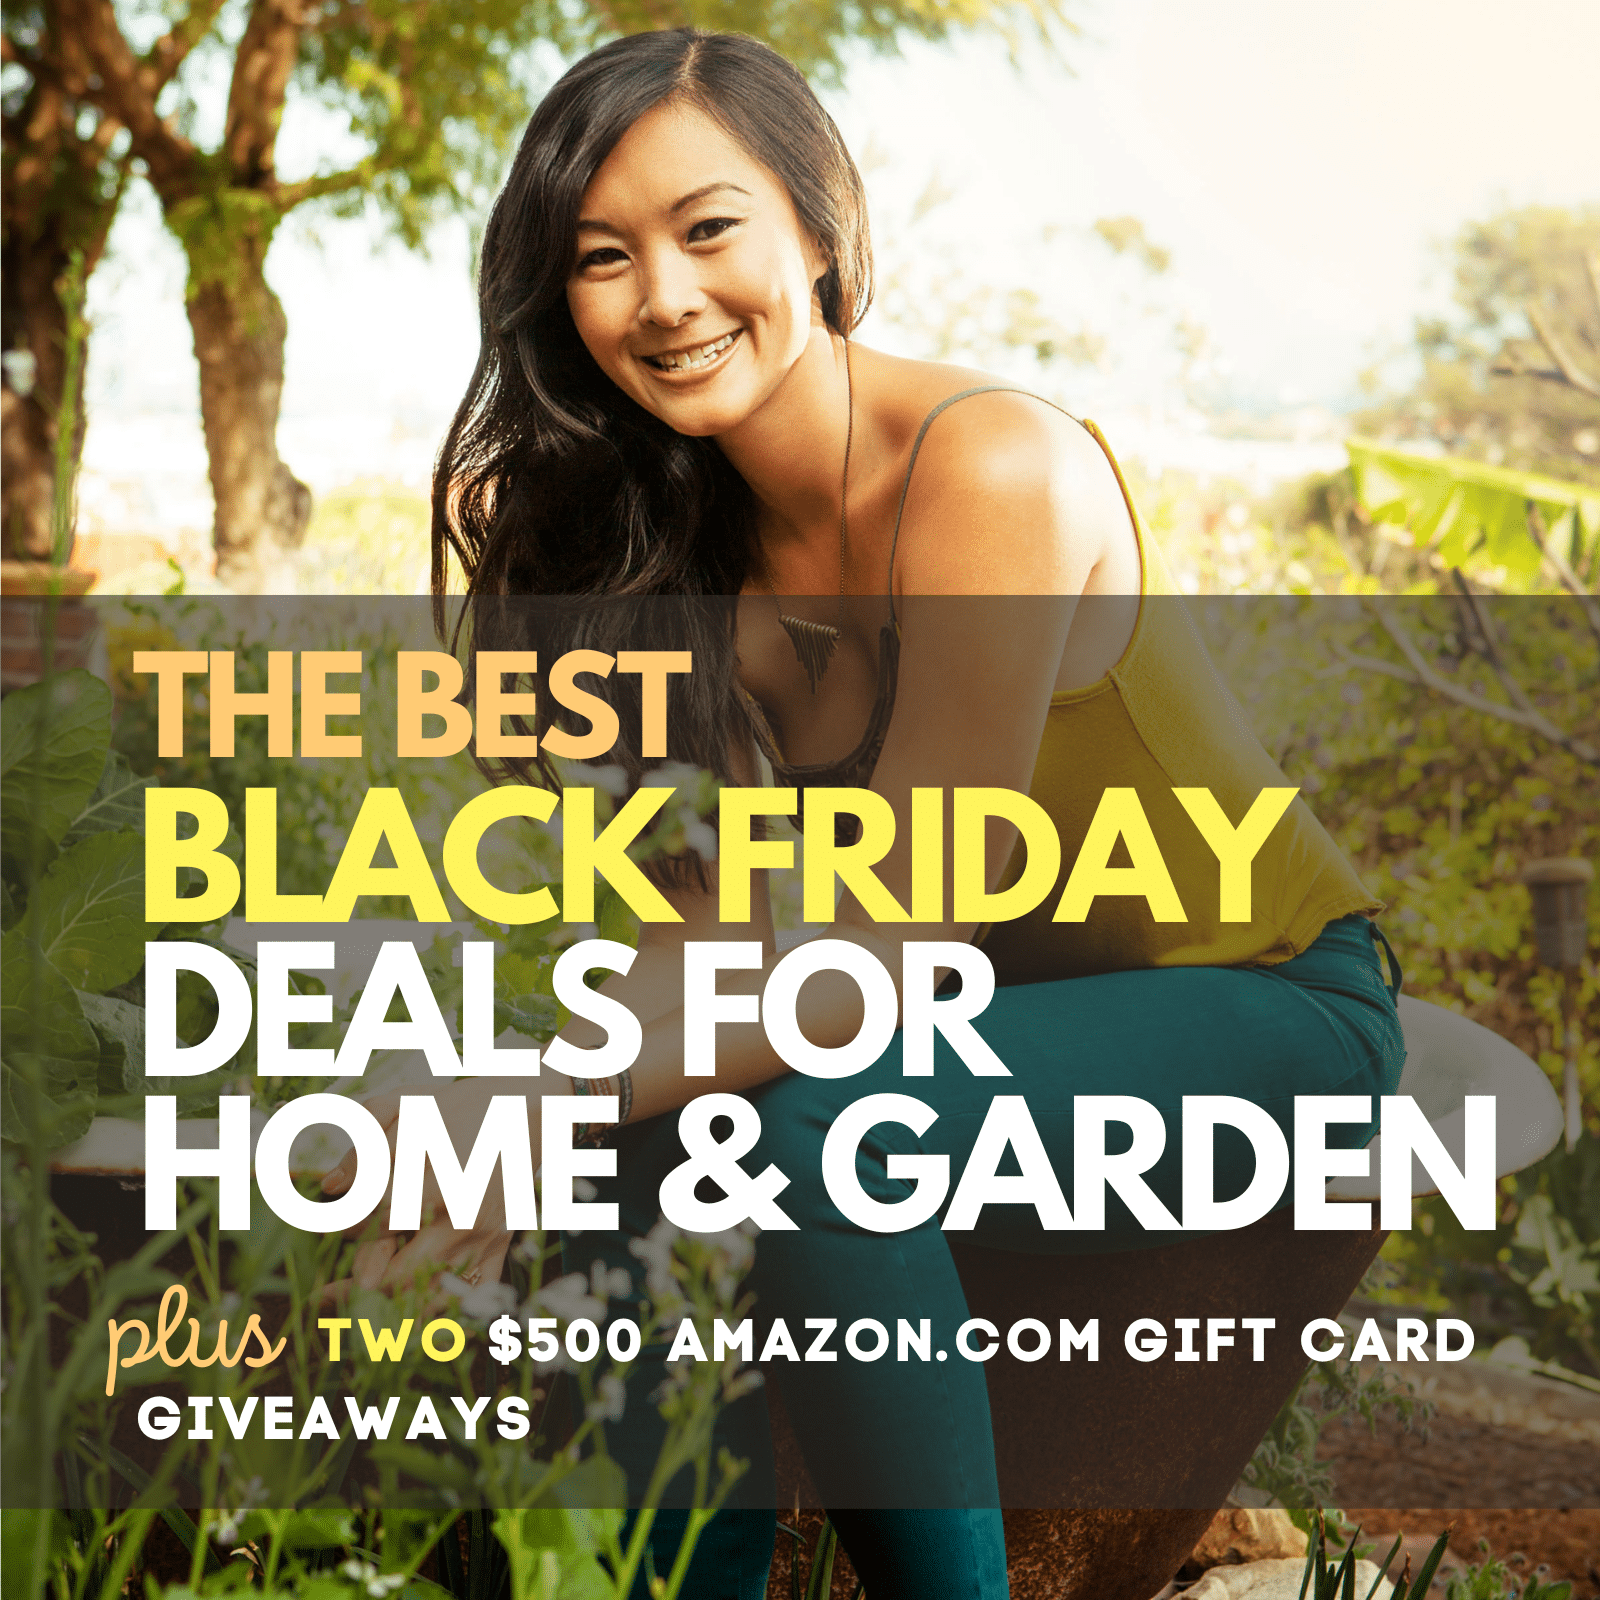 The best Black Friday deals for home and garden on Amazon